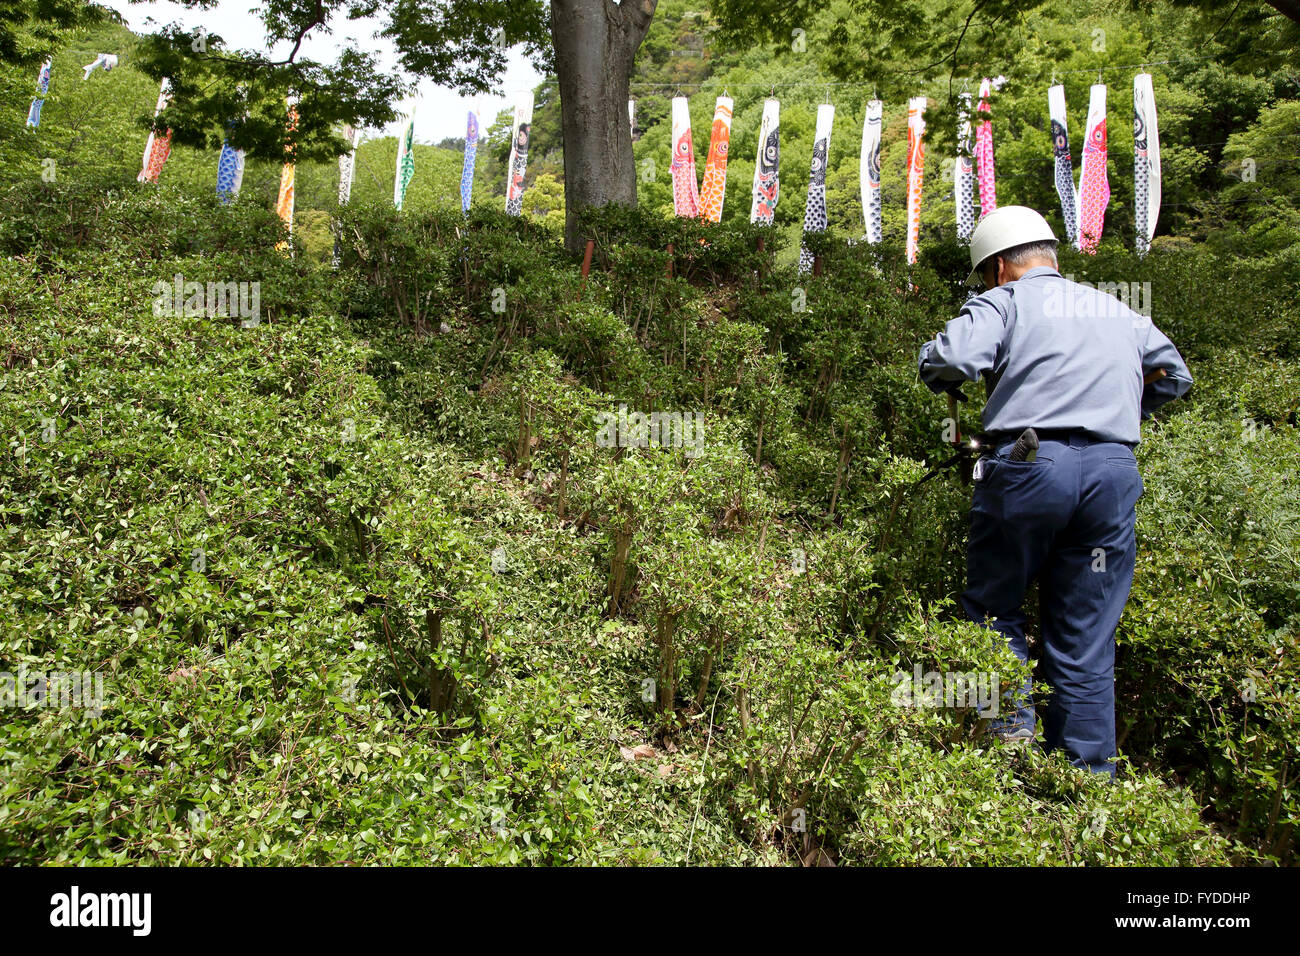 Japanese professional gardener pruning a shrub tree with shears Stock Photo